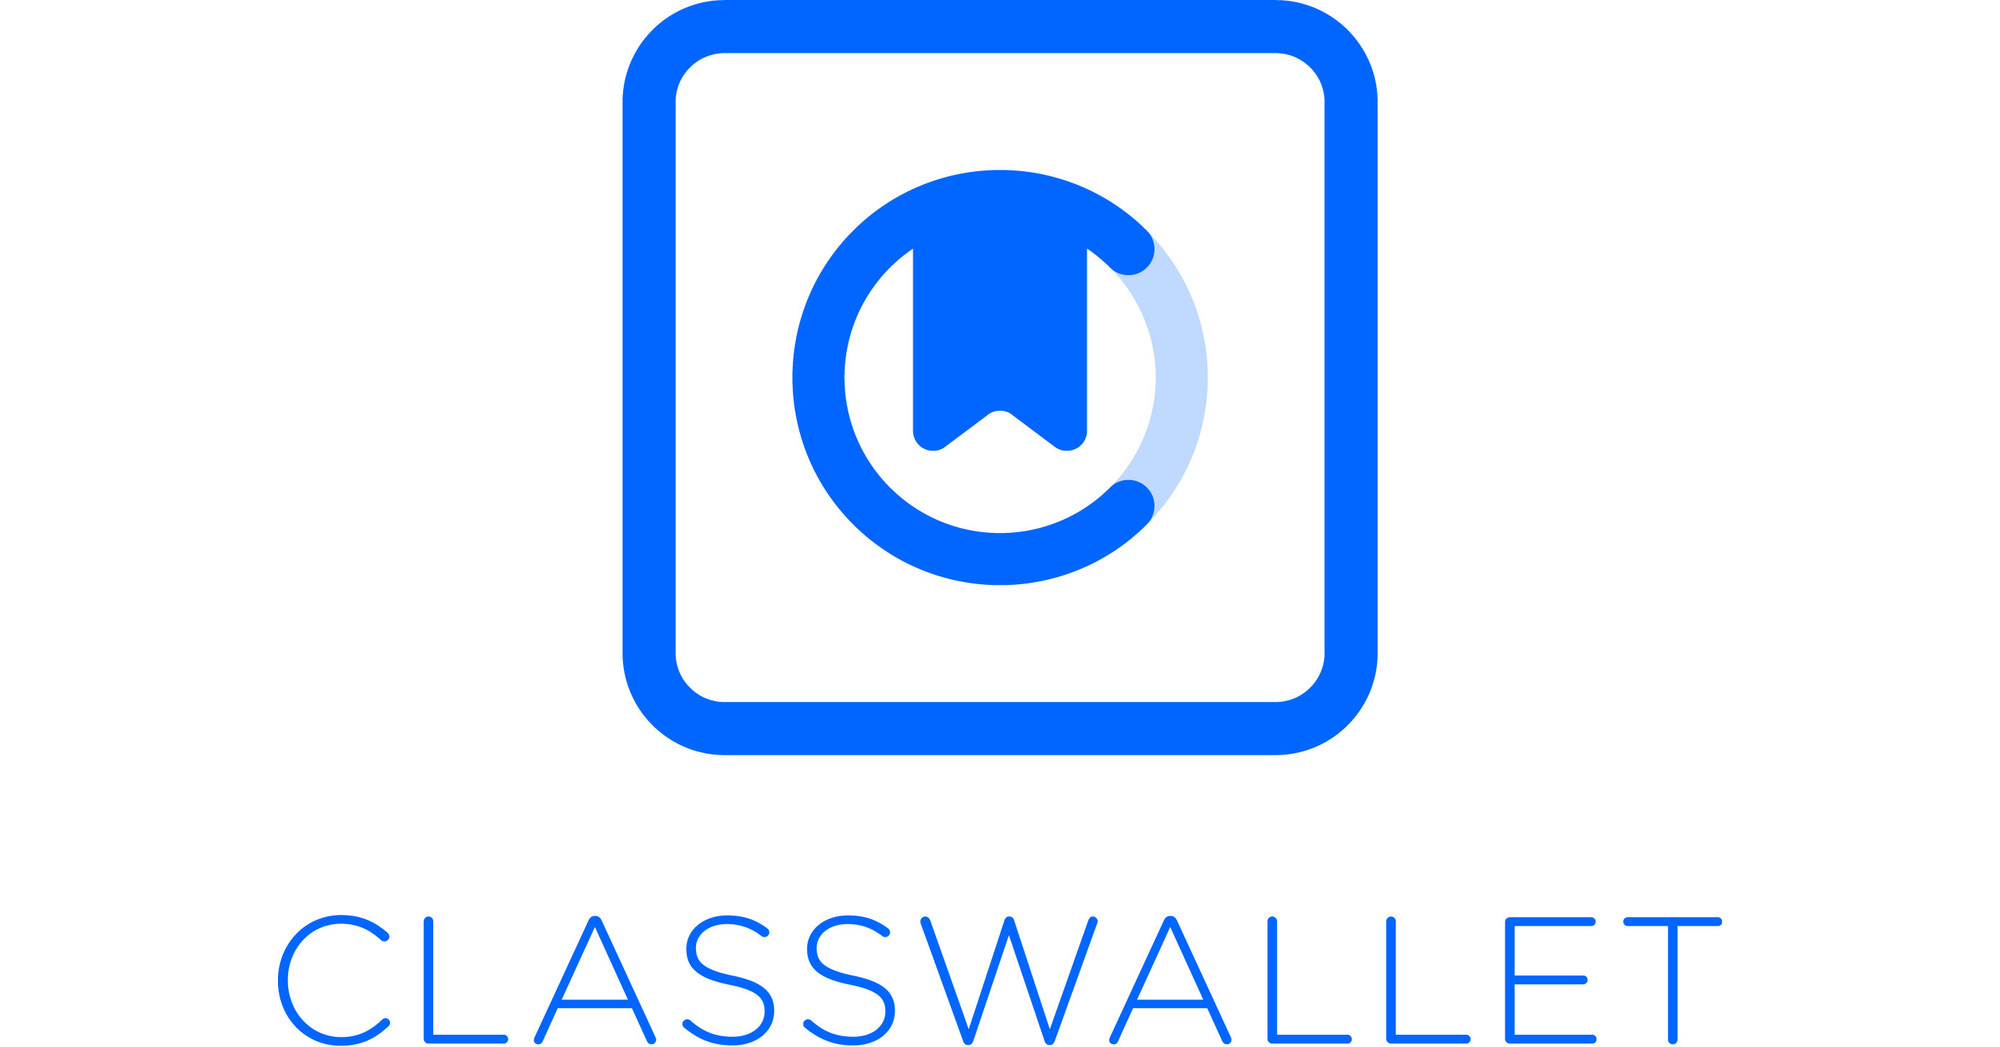 Missouri Department of Elementary and Secondary Education and the Missouri State Treasurer’s Office Select ClassWallet to Distribute Grant Funds to Non-Public Schools and Families